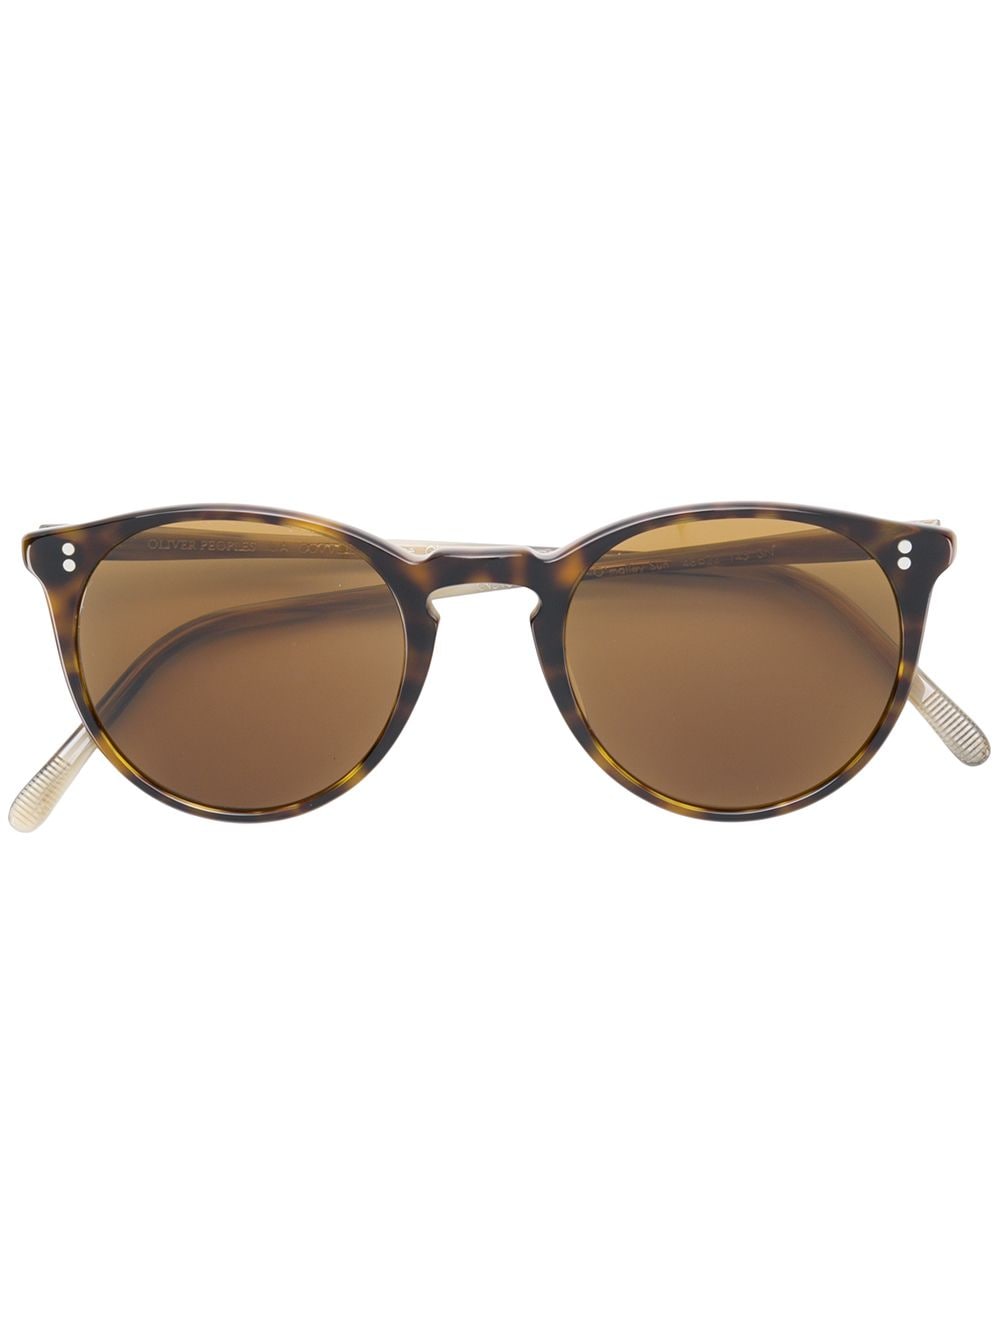 OLIVER PEOPLES O'MAILLEY SUNGLASSES